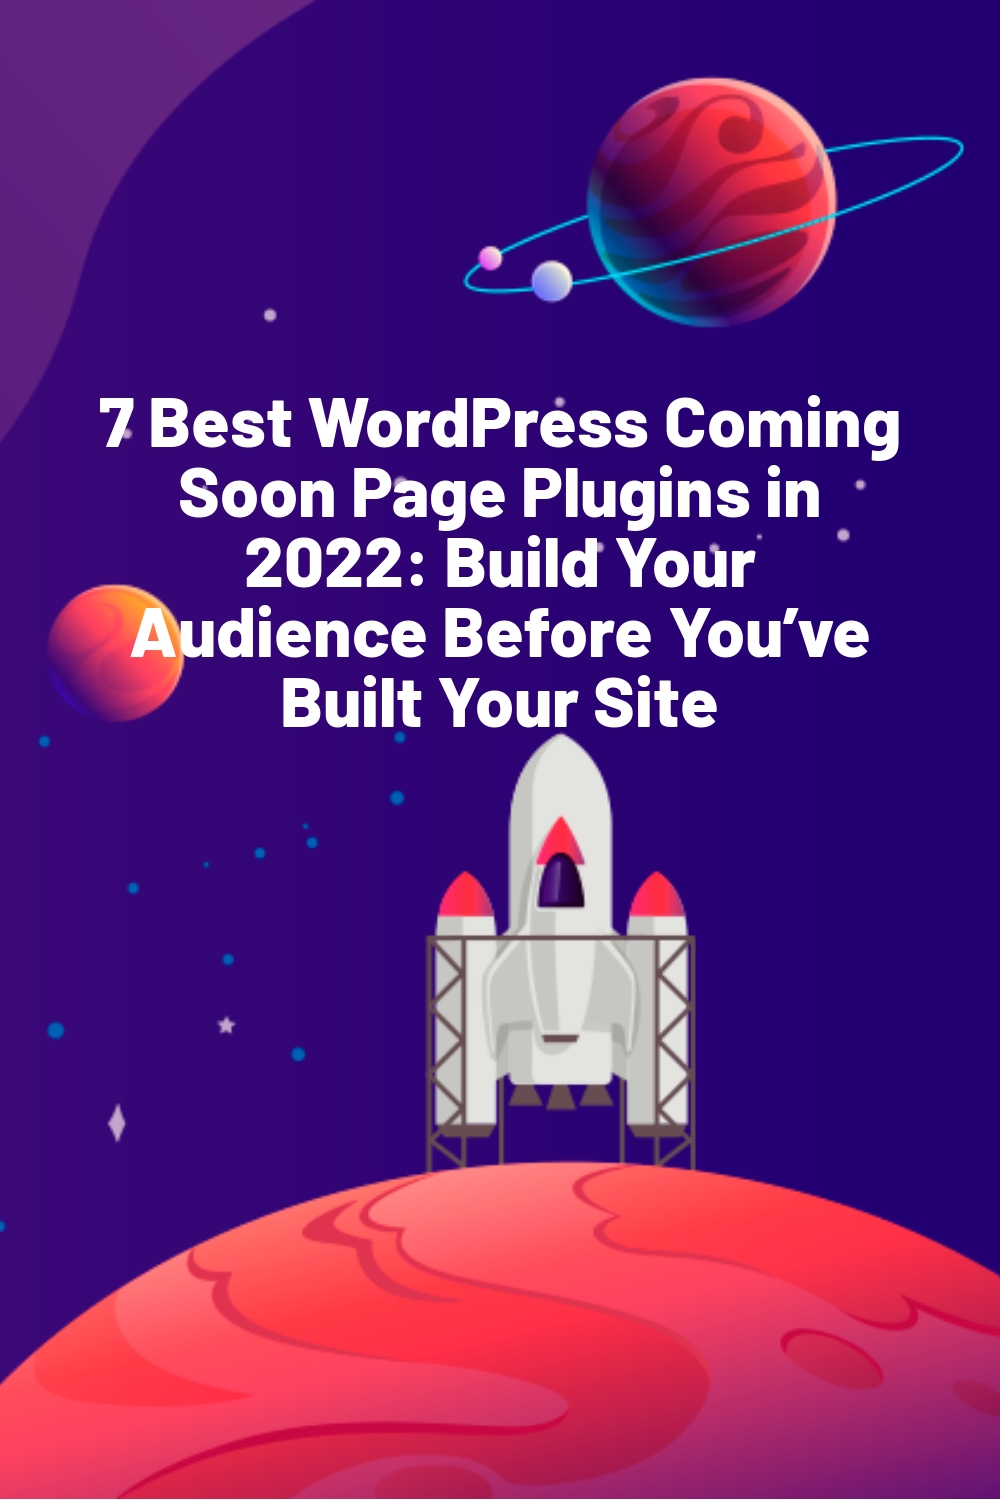 7 Best WordPress Coming Soon Page Plugins in 2022: Build Your Audience Before You’ve Built Your Site